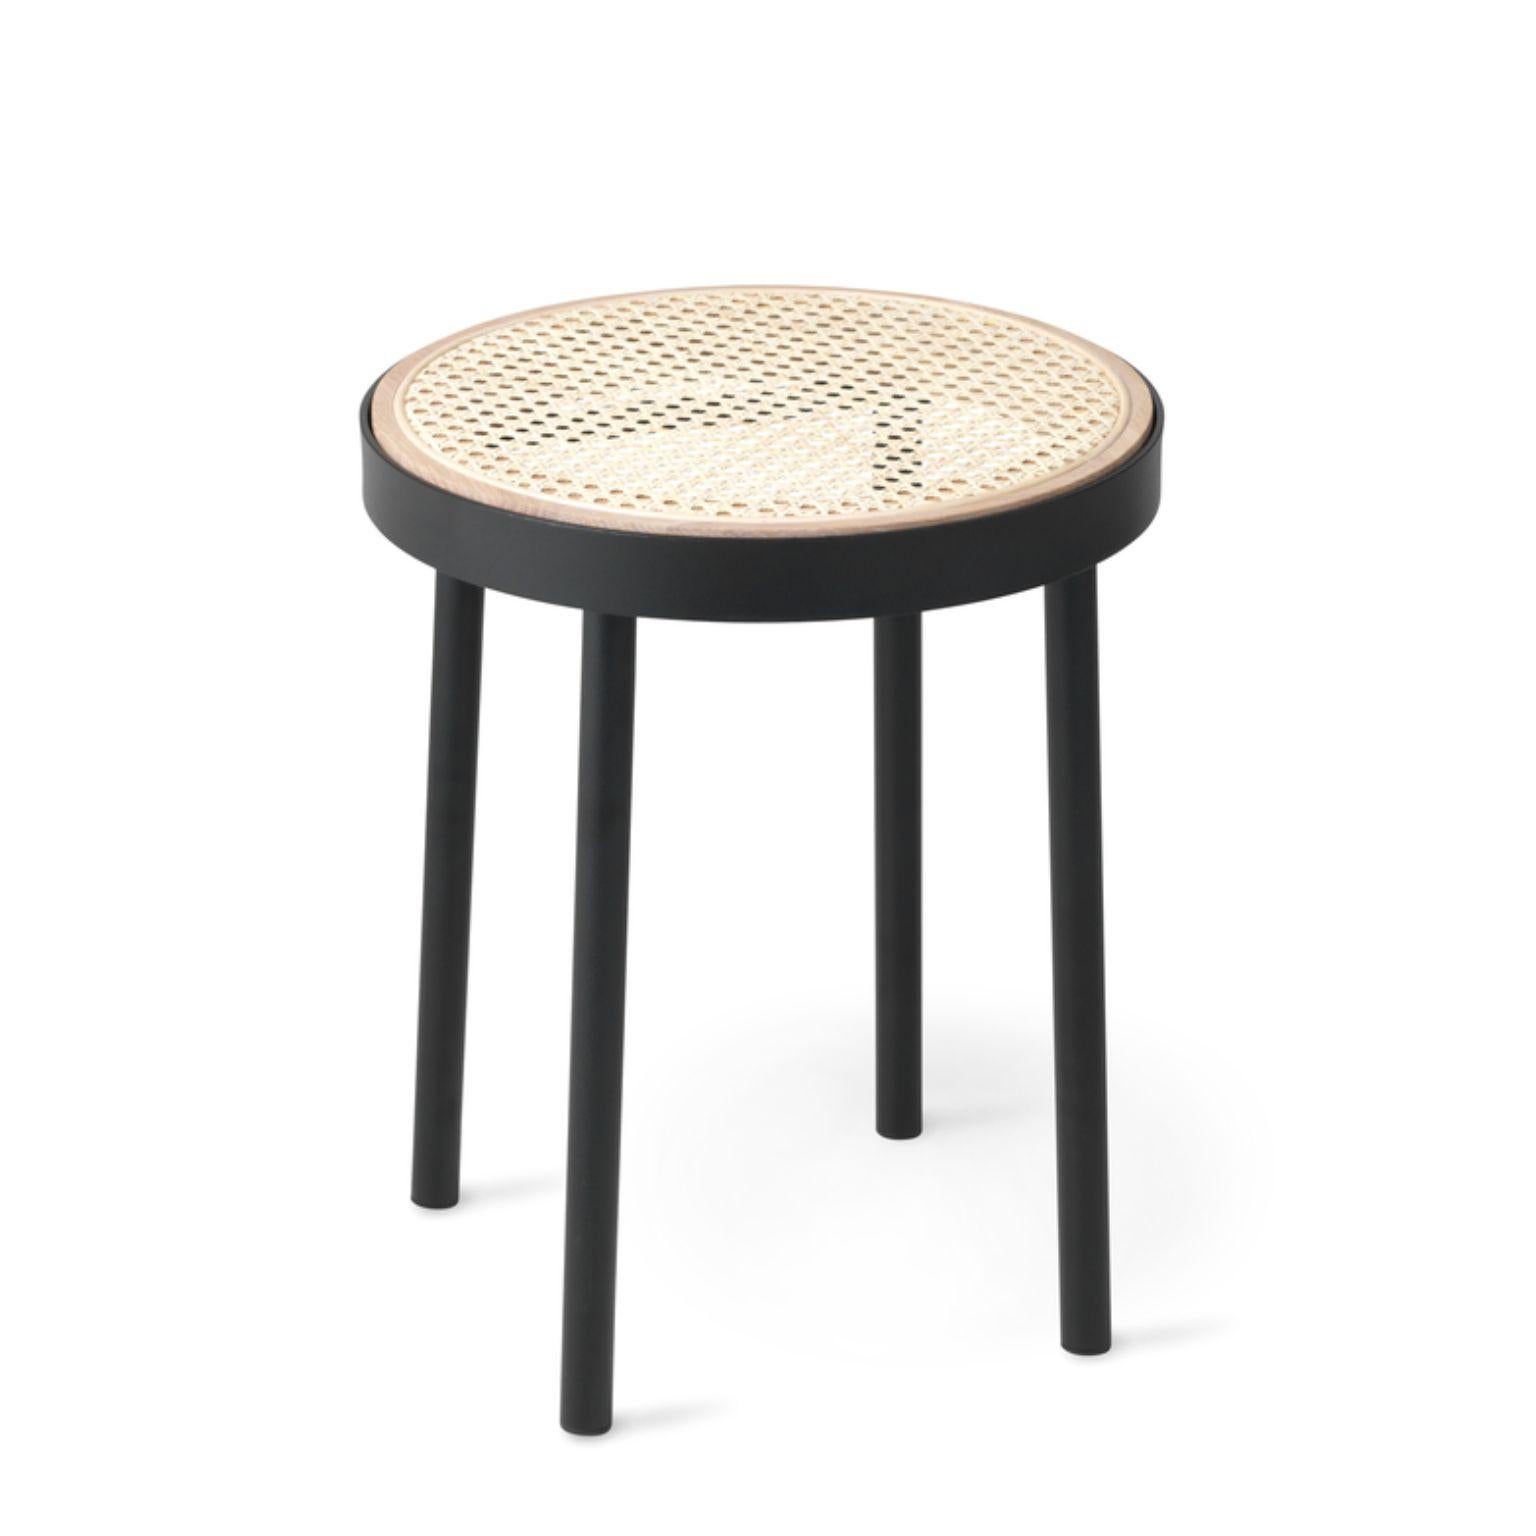 Be My Guest Stool by Warm Nordic
Dimensions: D 38 x H 46 cm
Material: White oiled solid oak, French cane, Black noir powder coated steel frame
Weight: 8 kg

Warm Nordic is an ambitious design brand anchored in Nordic design history and with a